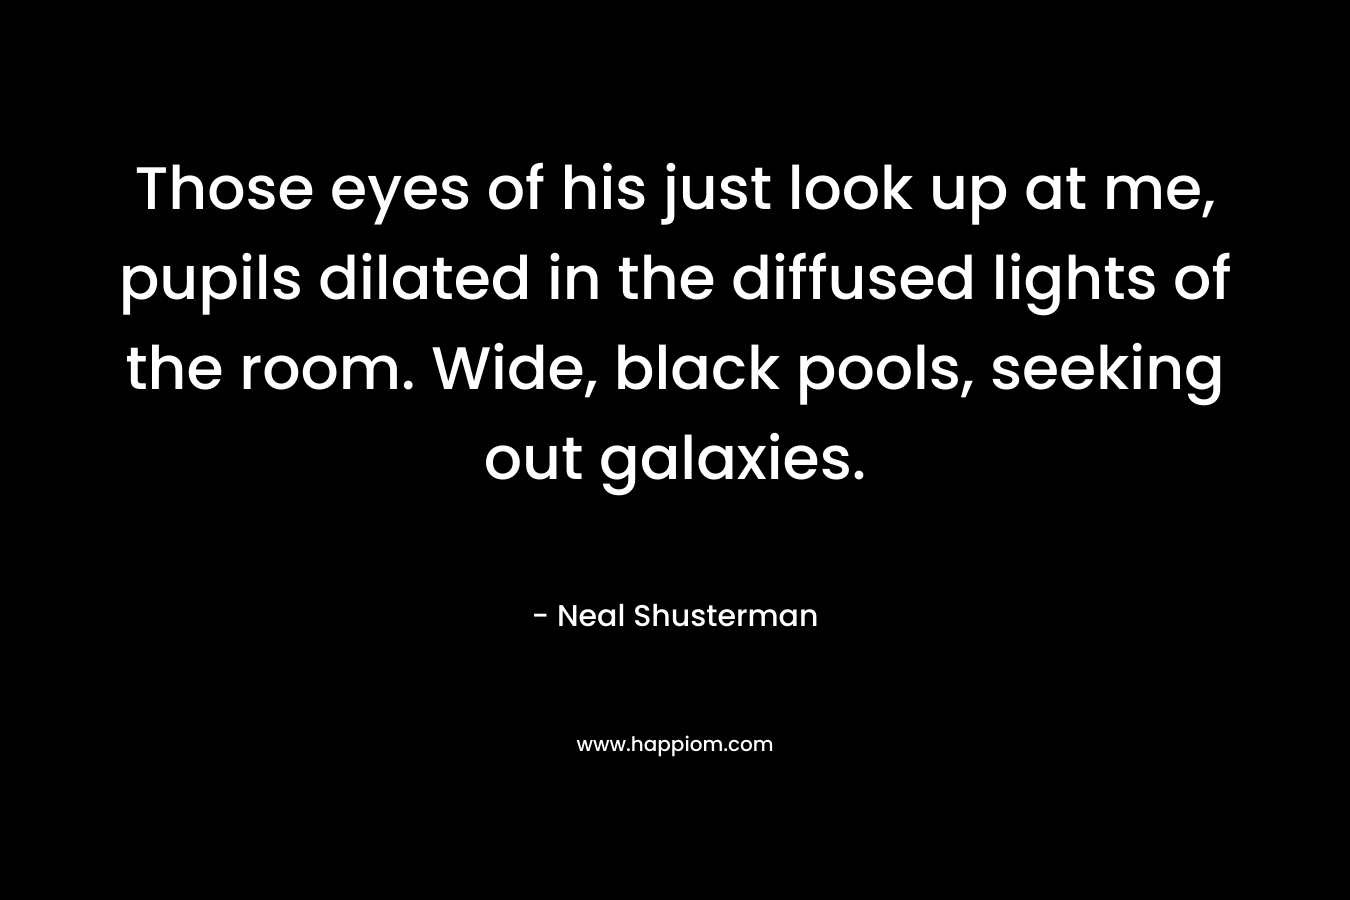 Those eyes of his just look up at me, pupils dilated in the diffused lights of the room. Wide, black pools, seeking out galaxies. – Neal Shusterman